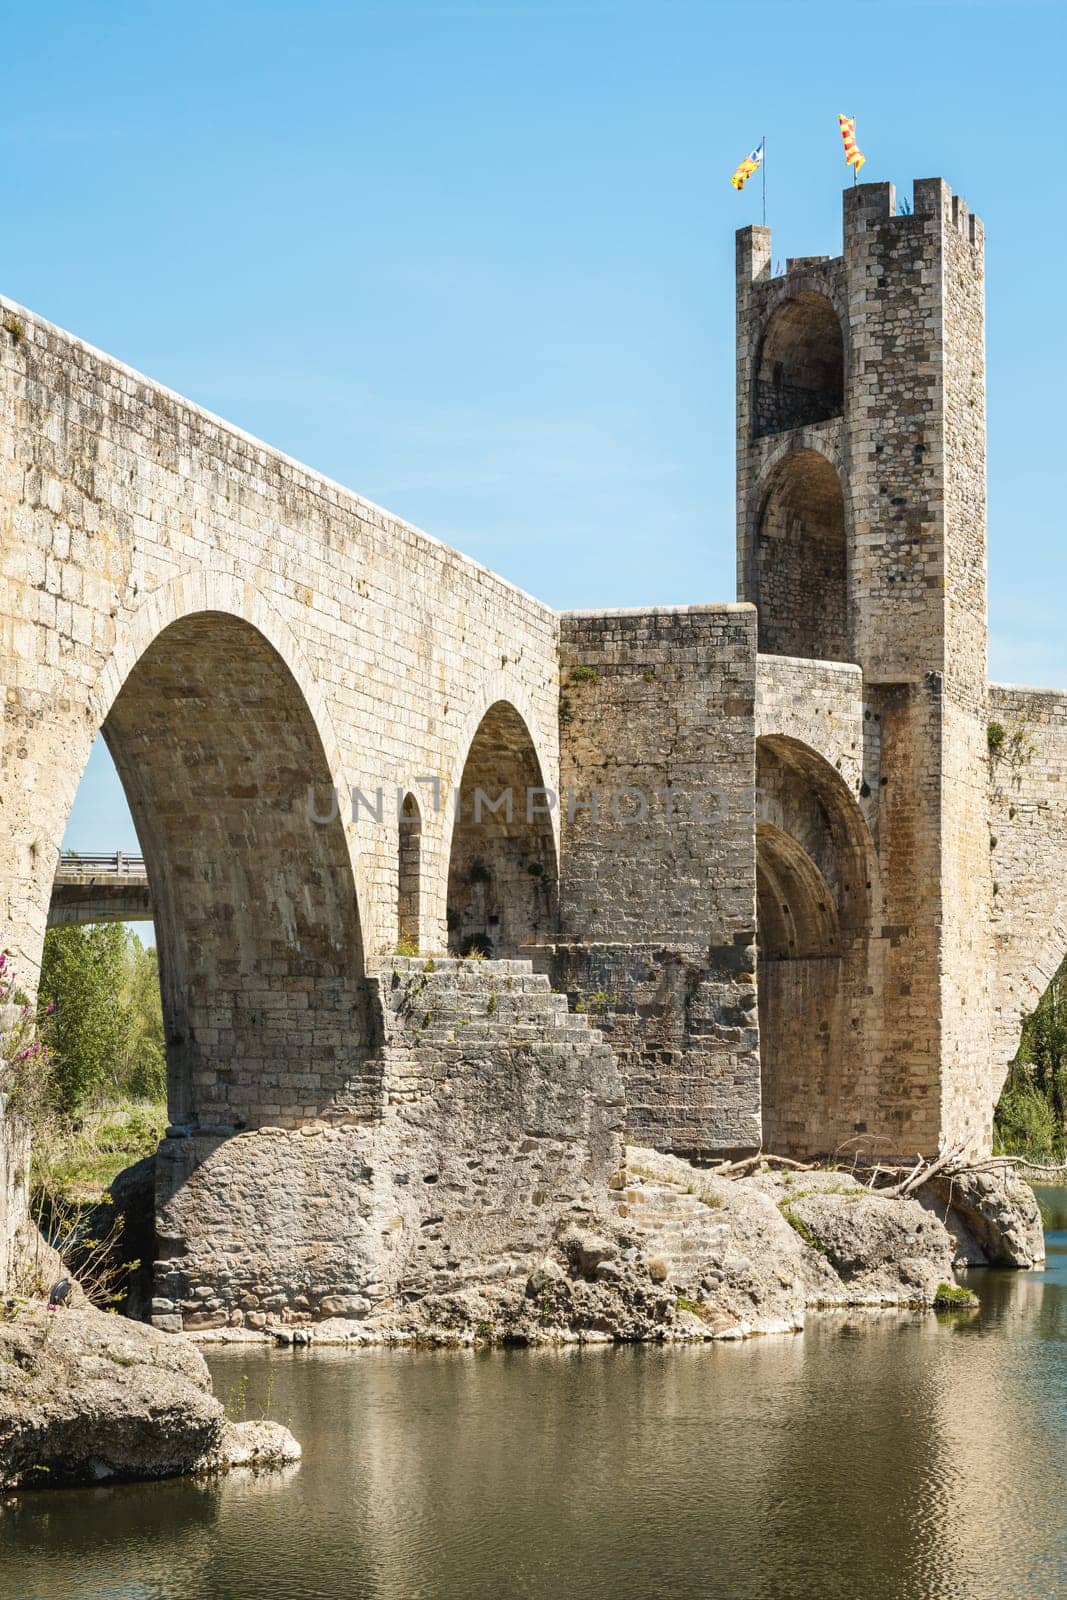 Medieval bridge of Besalú, Girona, with a tower in the background. by orafotograf